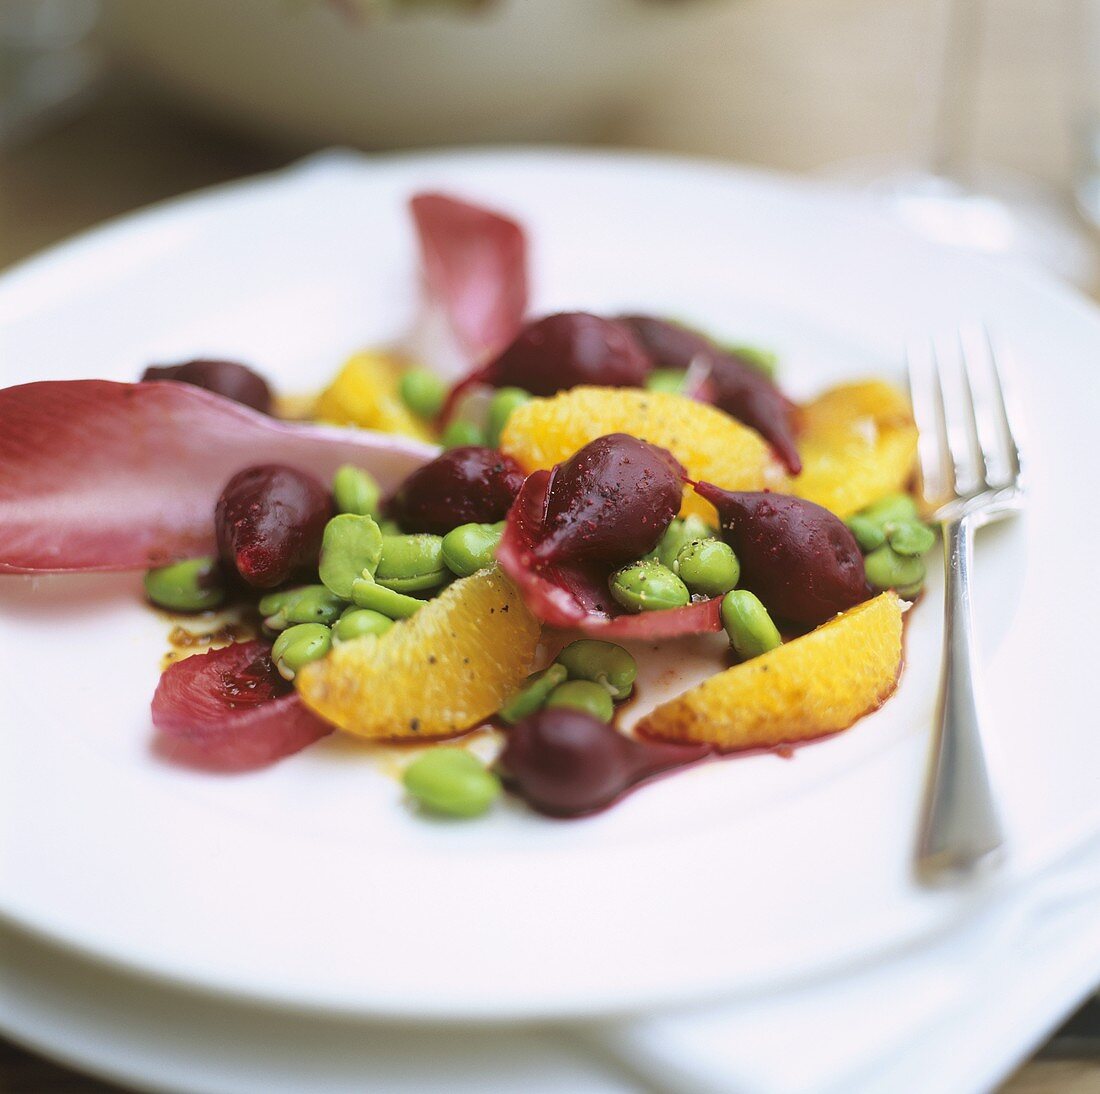 Beetroot salad with oranges and broad beans